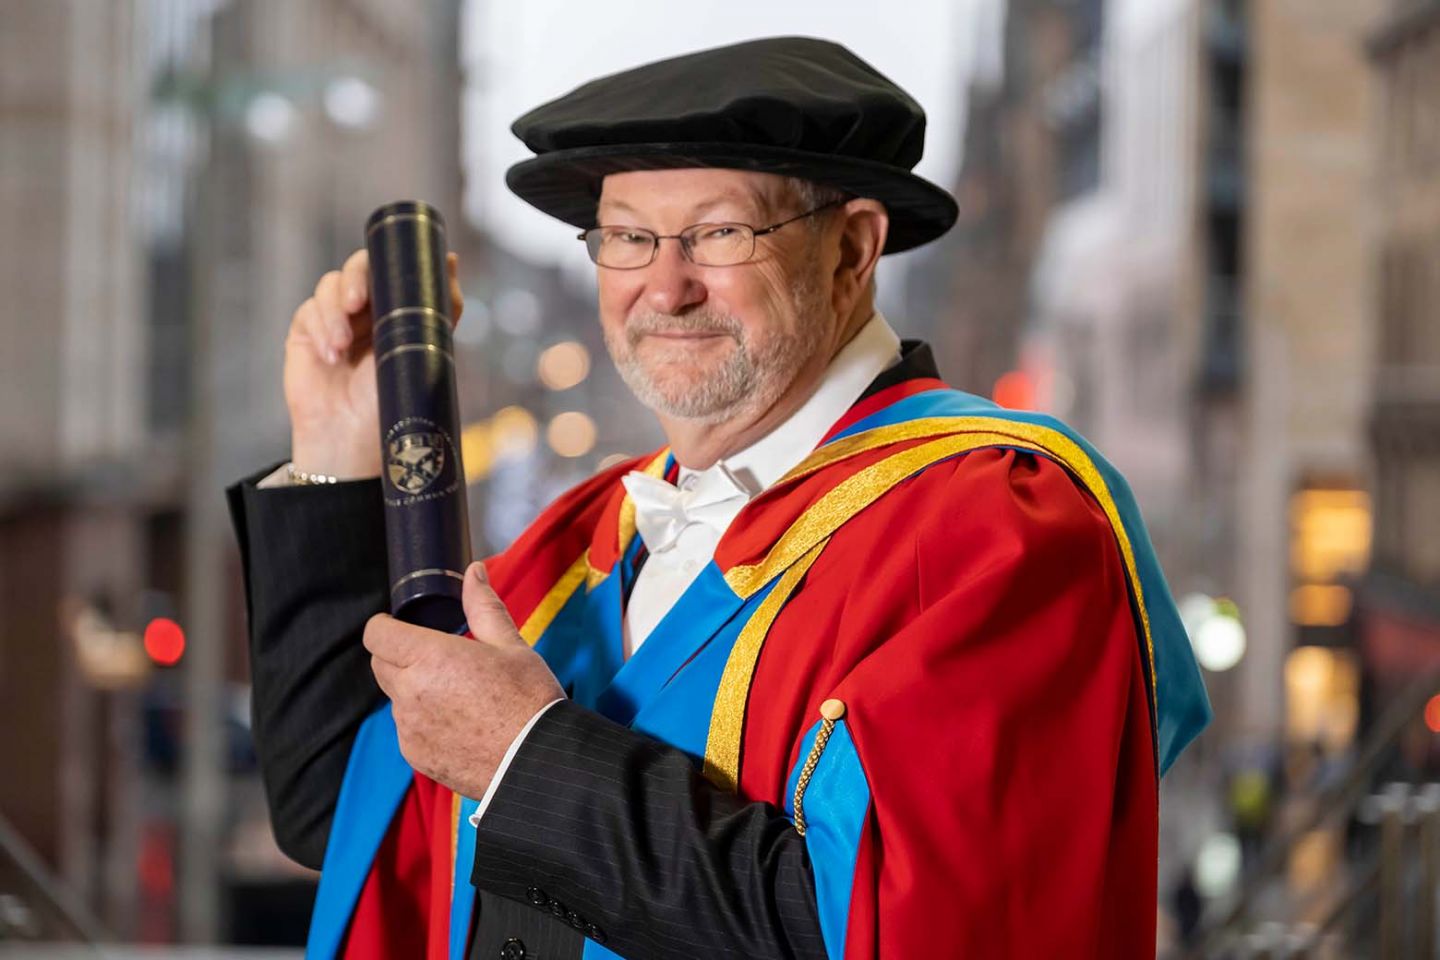 GCU Honorary Graduate Dr Jim Paterson wearing his graduation hood and hat and holding a degree container